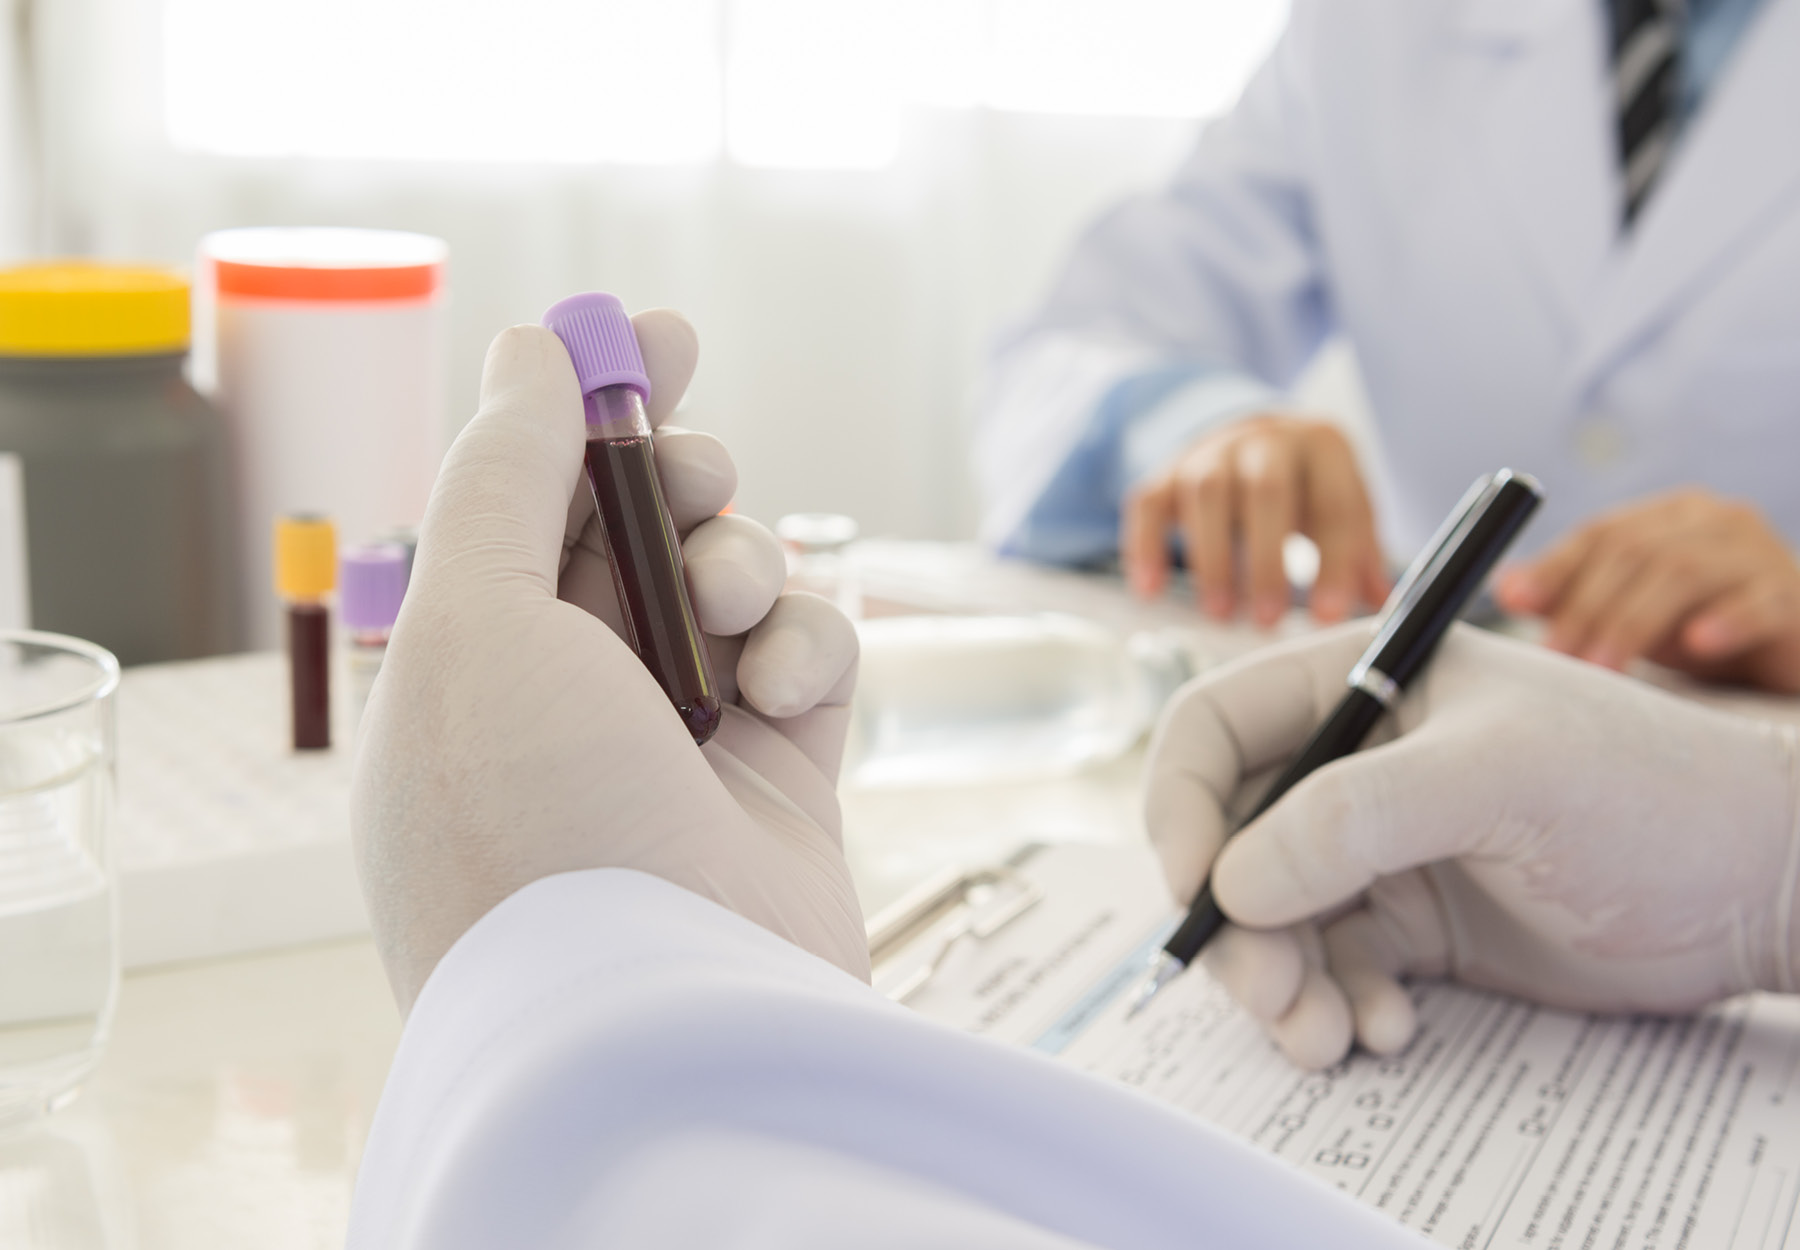 Closeup stock image of lab worker holding a blood sample tube in one hand and filling out a form with the other hand